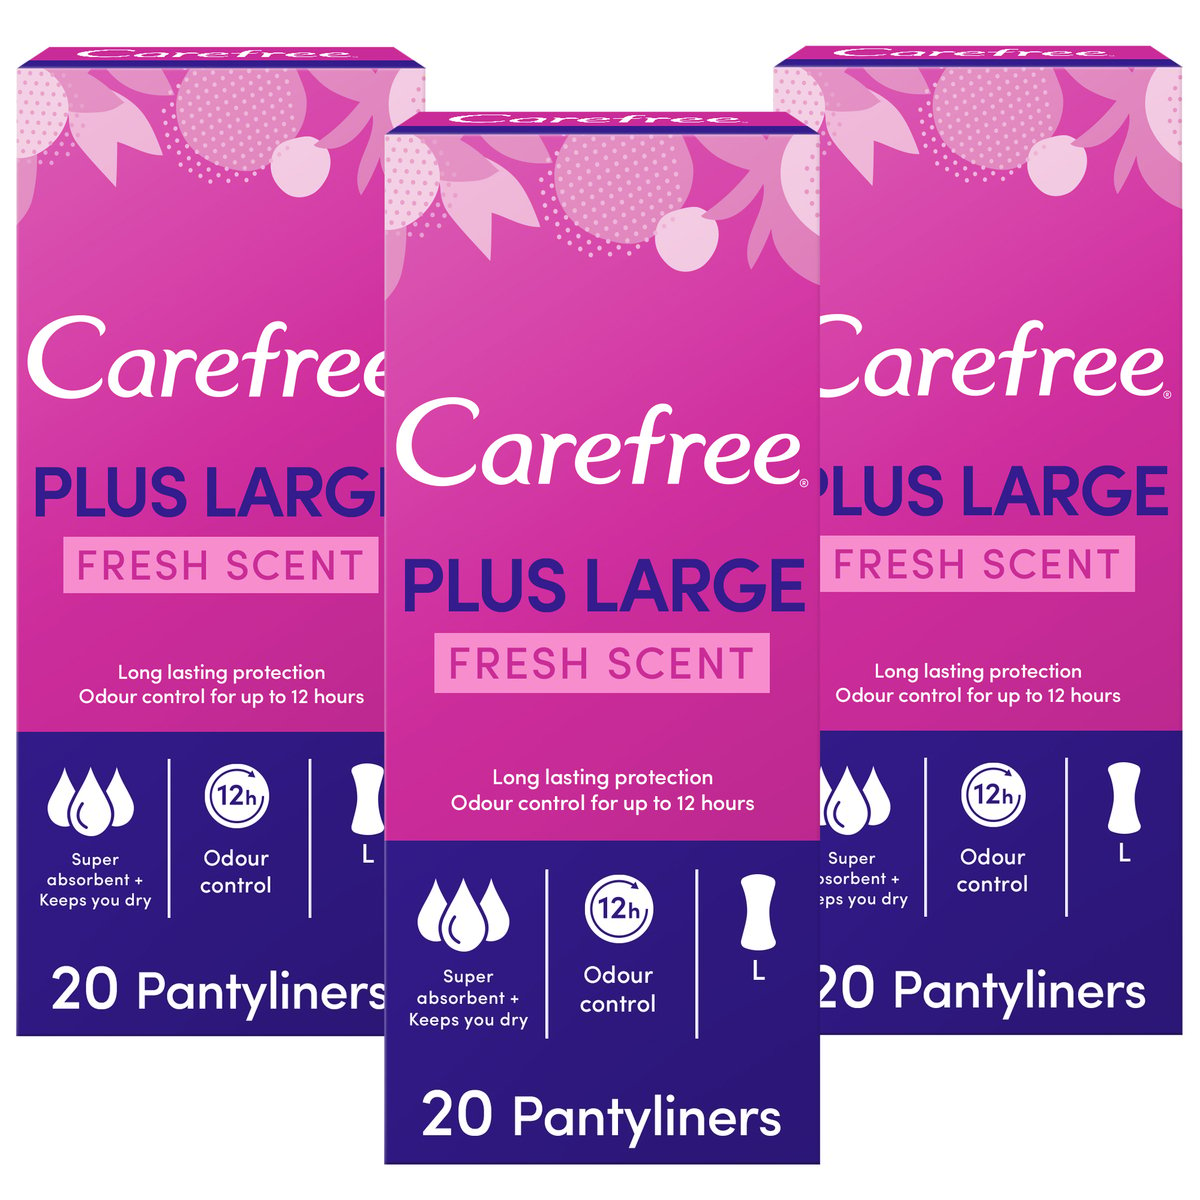 Carefree Panty Liners Plus Large Fresh Scent 20pcs 2+1